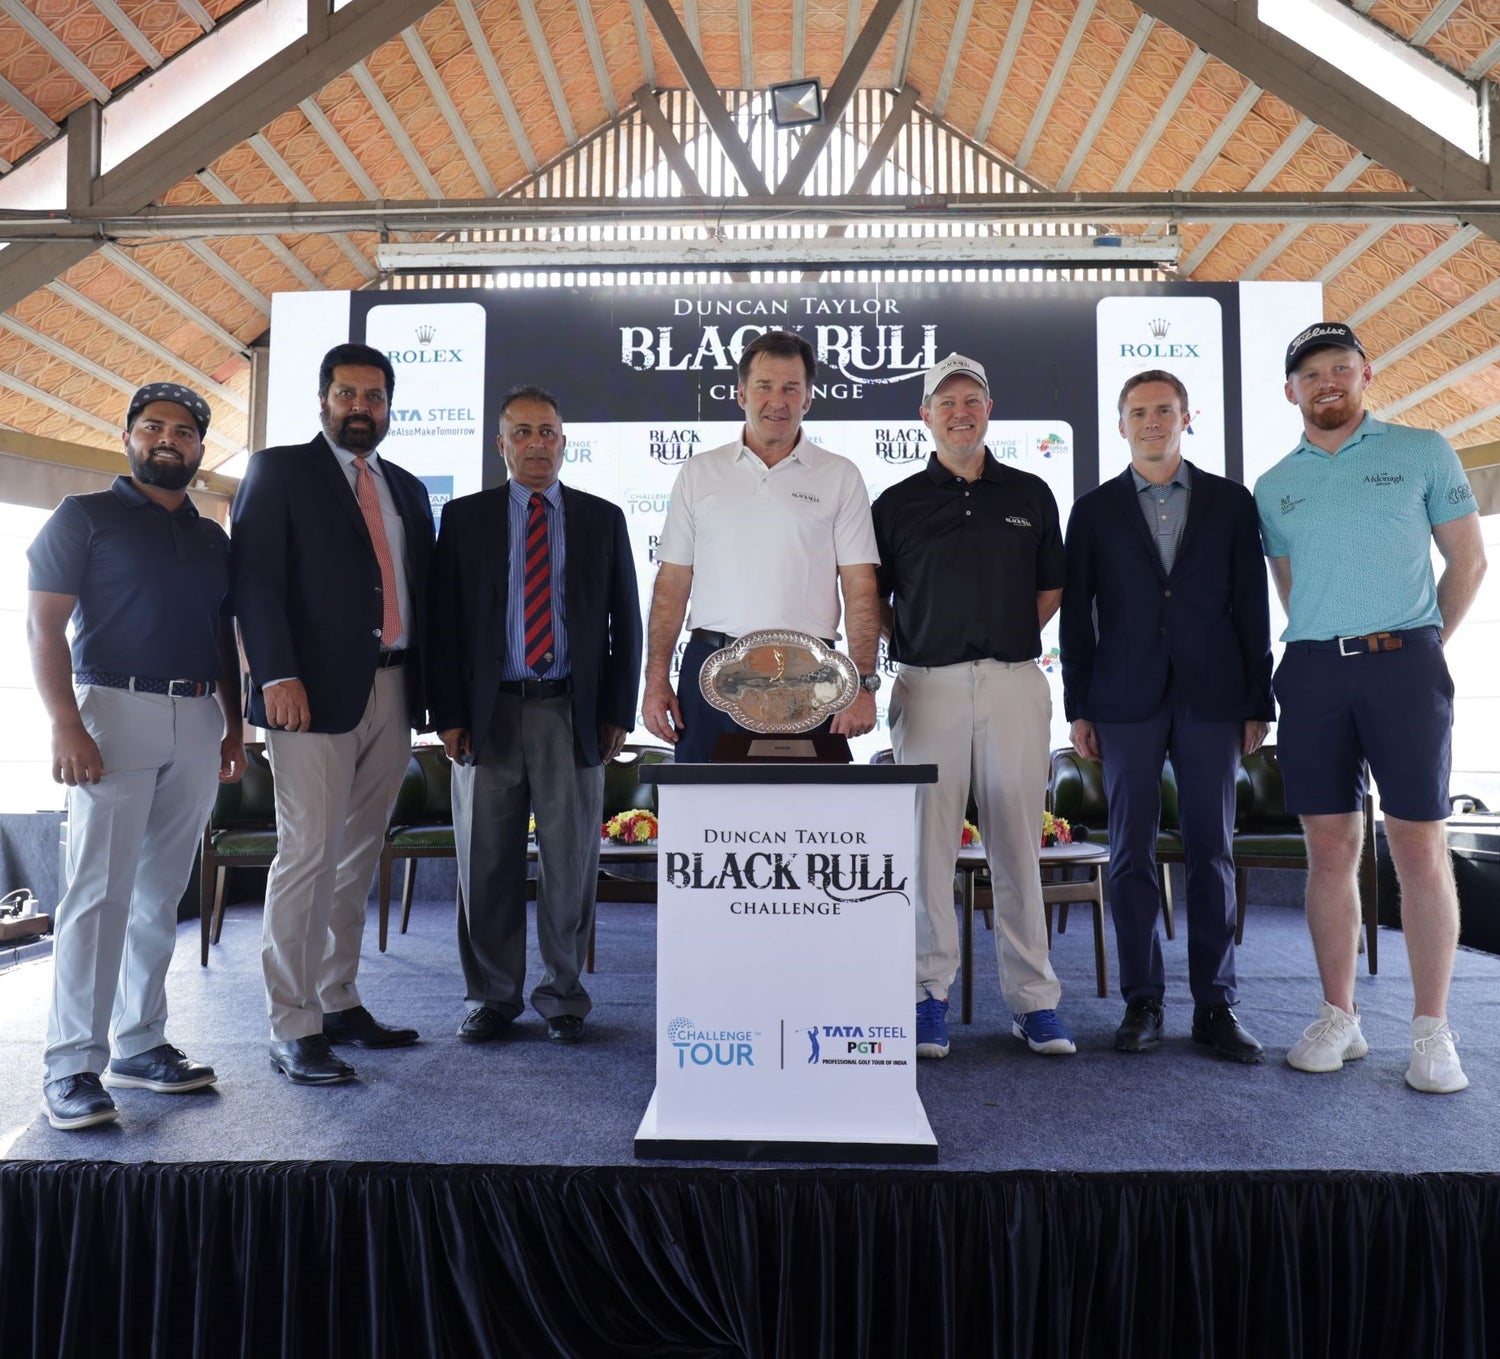 Duncan Taylor Black Bull Challenge tees off at KGA on March 23